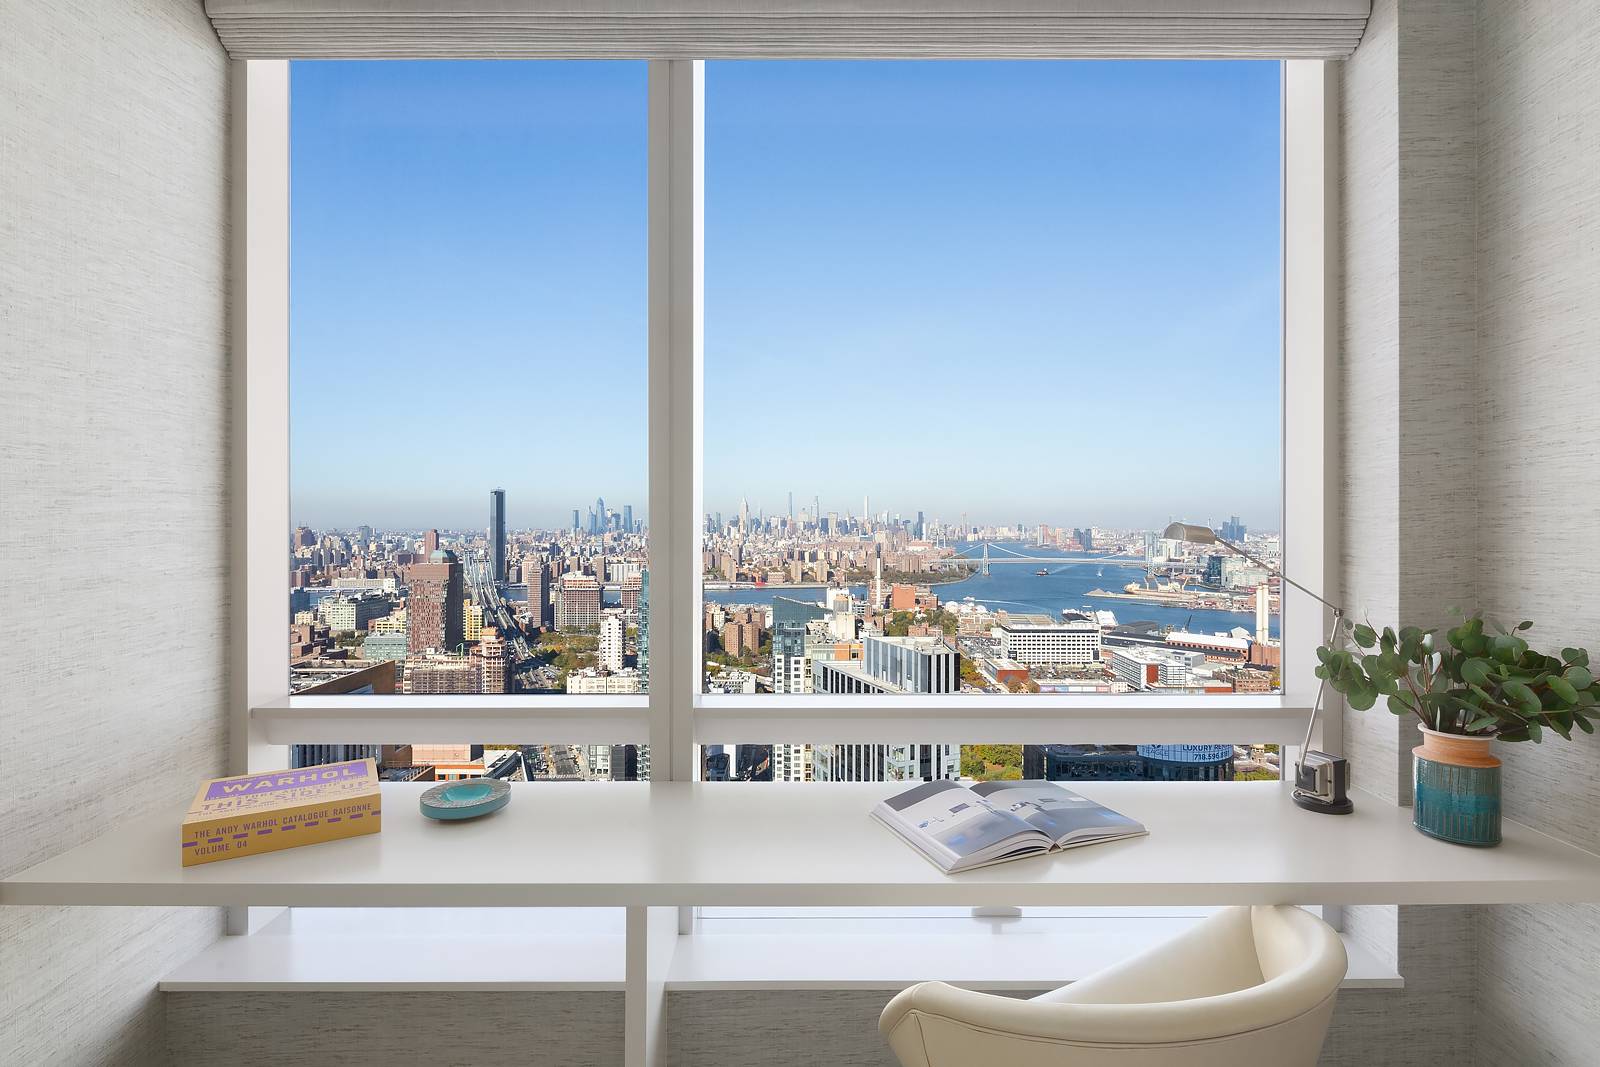 THE SMARTEST BUY IN BROOKLYN BROOKLYN POINT OFFERS ONE OF THE LAST 25 YEAR TAX ABATEMENTS AVAILABLE IN NEW YORK CITY.